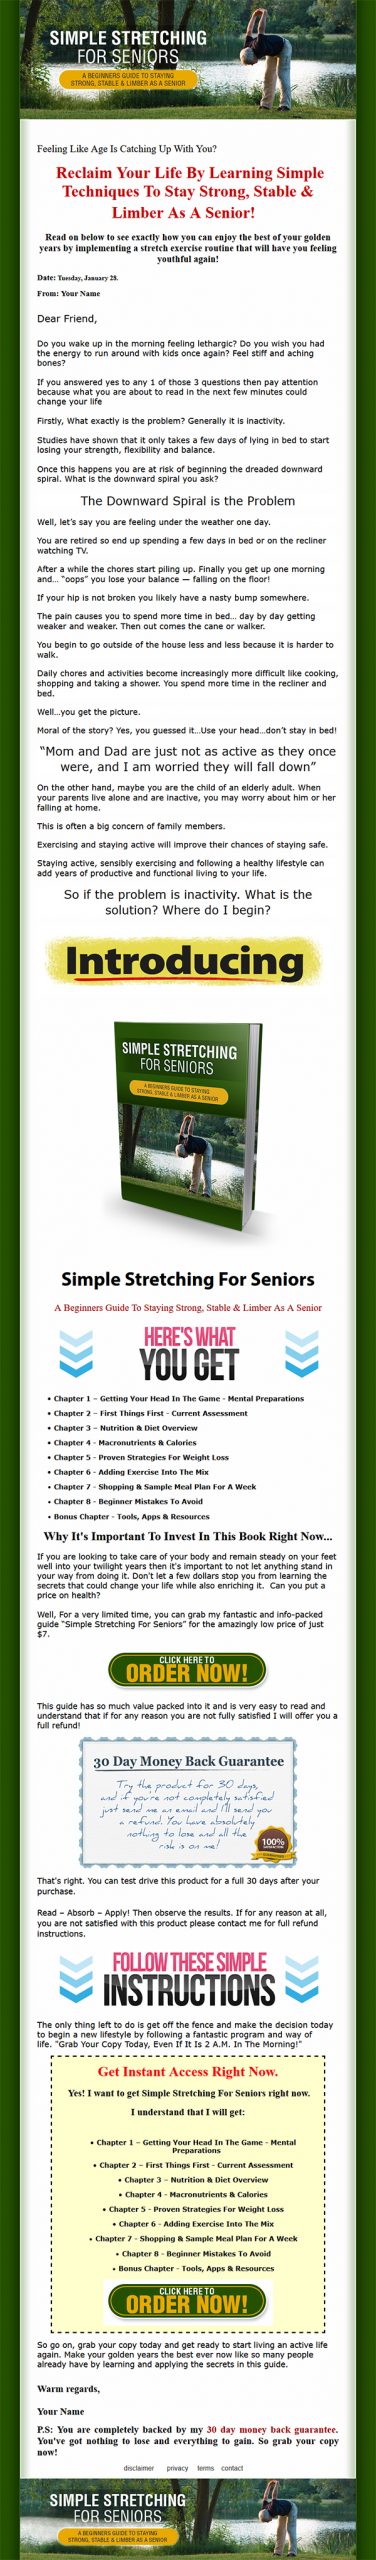 Simple Stretching for Seniors Ebook and Videos MRR